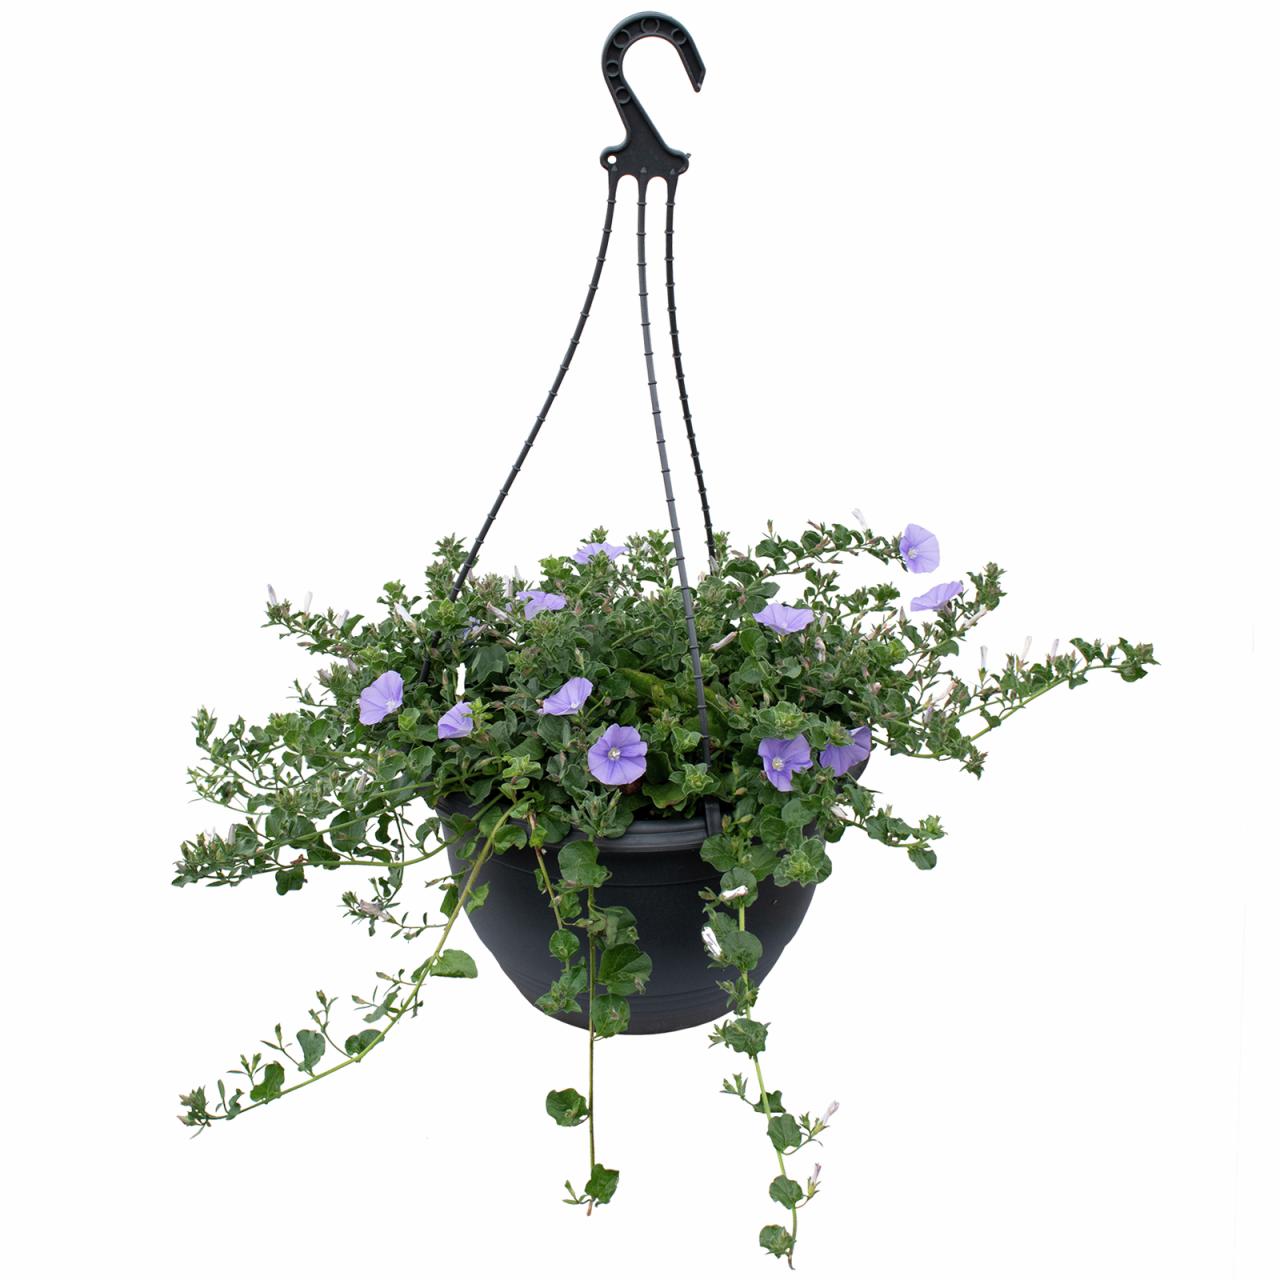 Hanging Plants Indoor | Bunnings Hanging Plants Indoor: Enhance Your Space with Lush Greenery